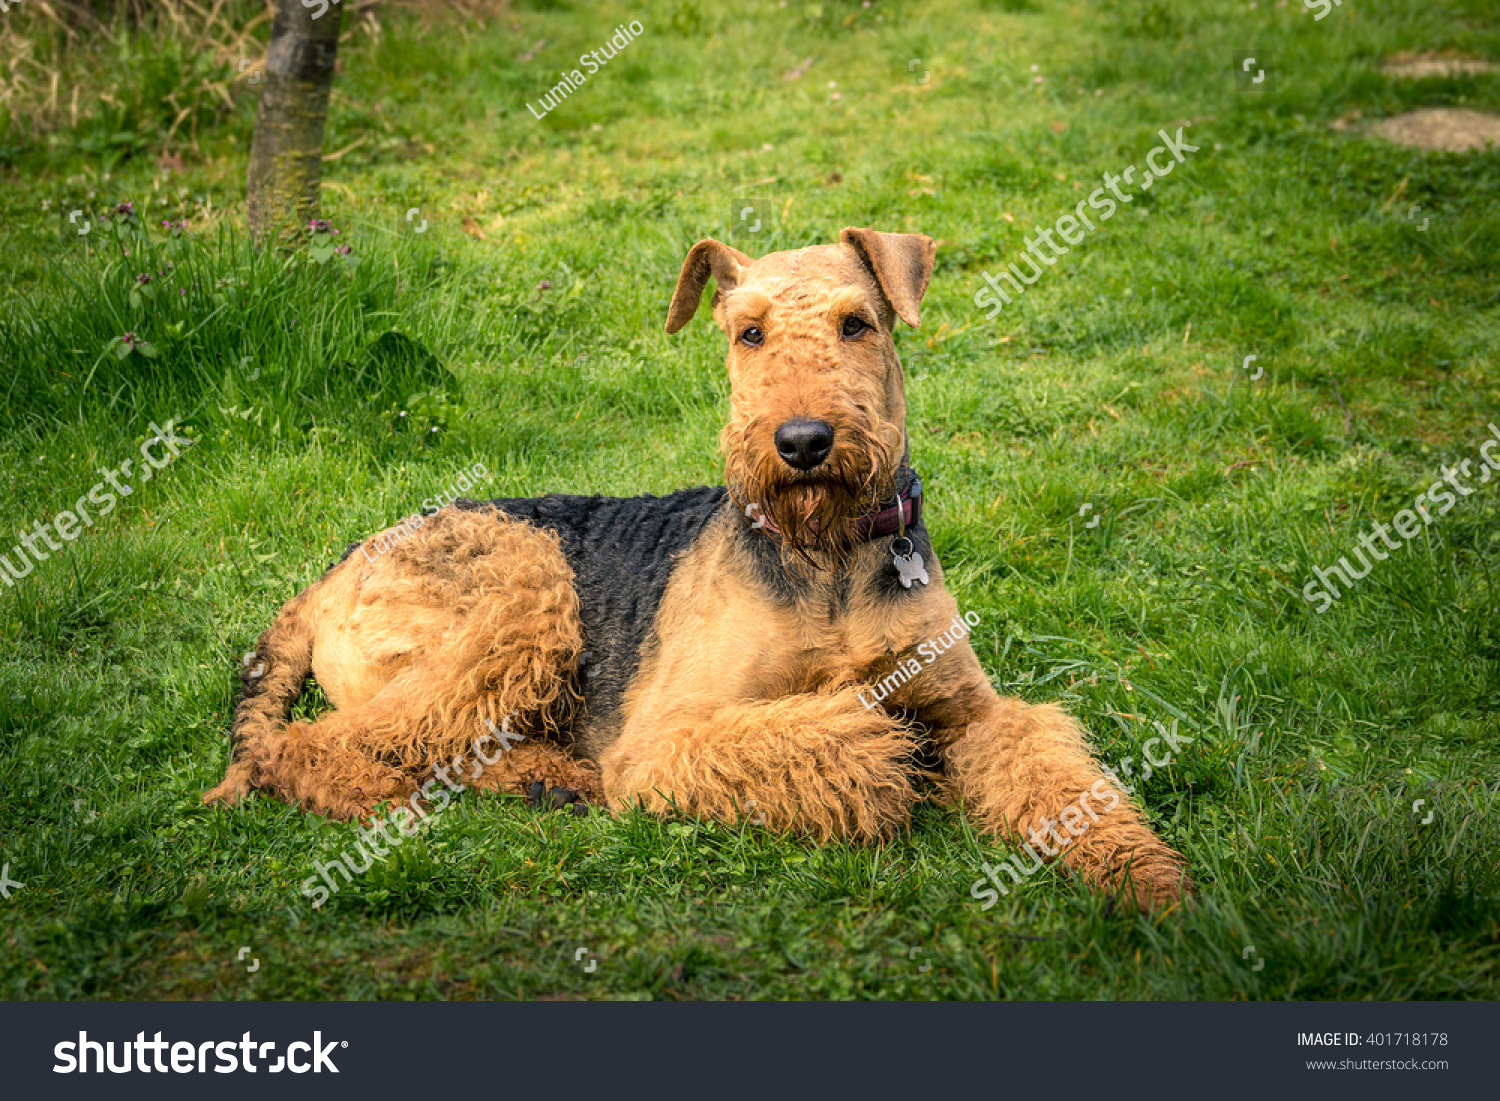 Dog Airedale Terrier Portrait On Grass Stock Photo Edit Now 401718178